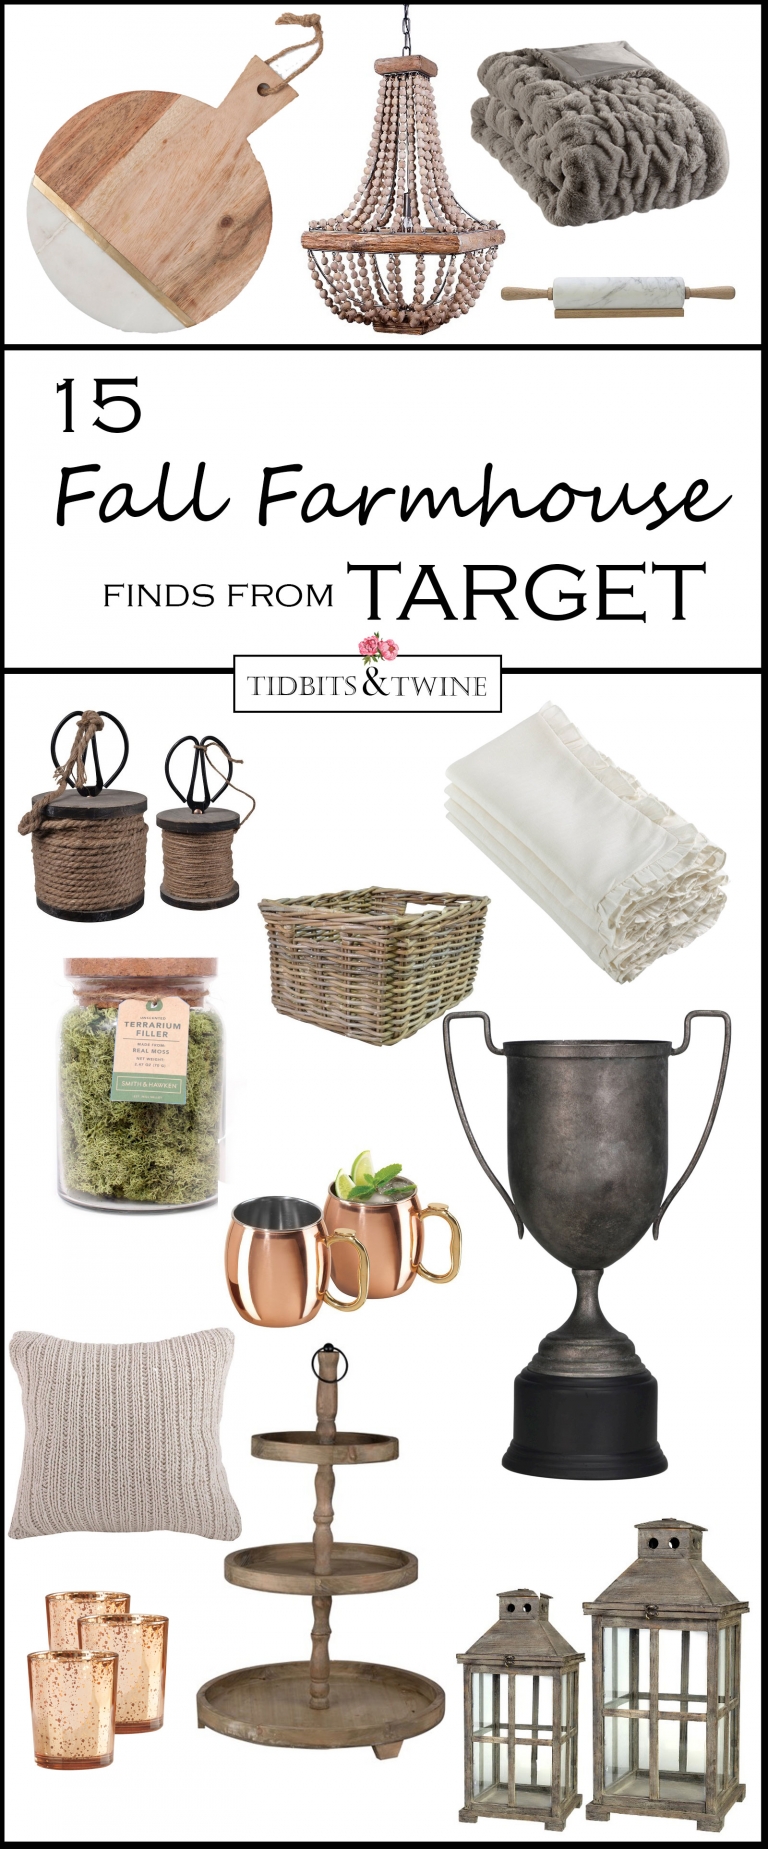 15 Favorite Fall Farmhouse Finds – From Target